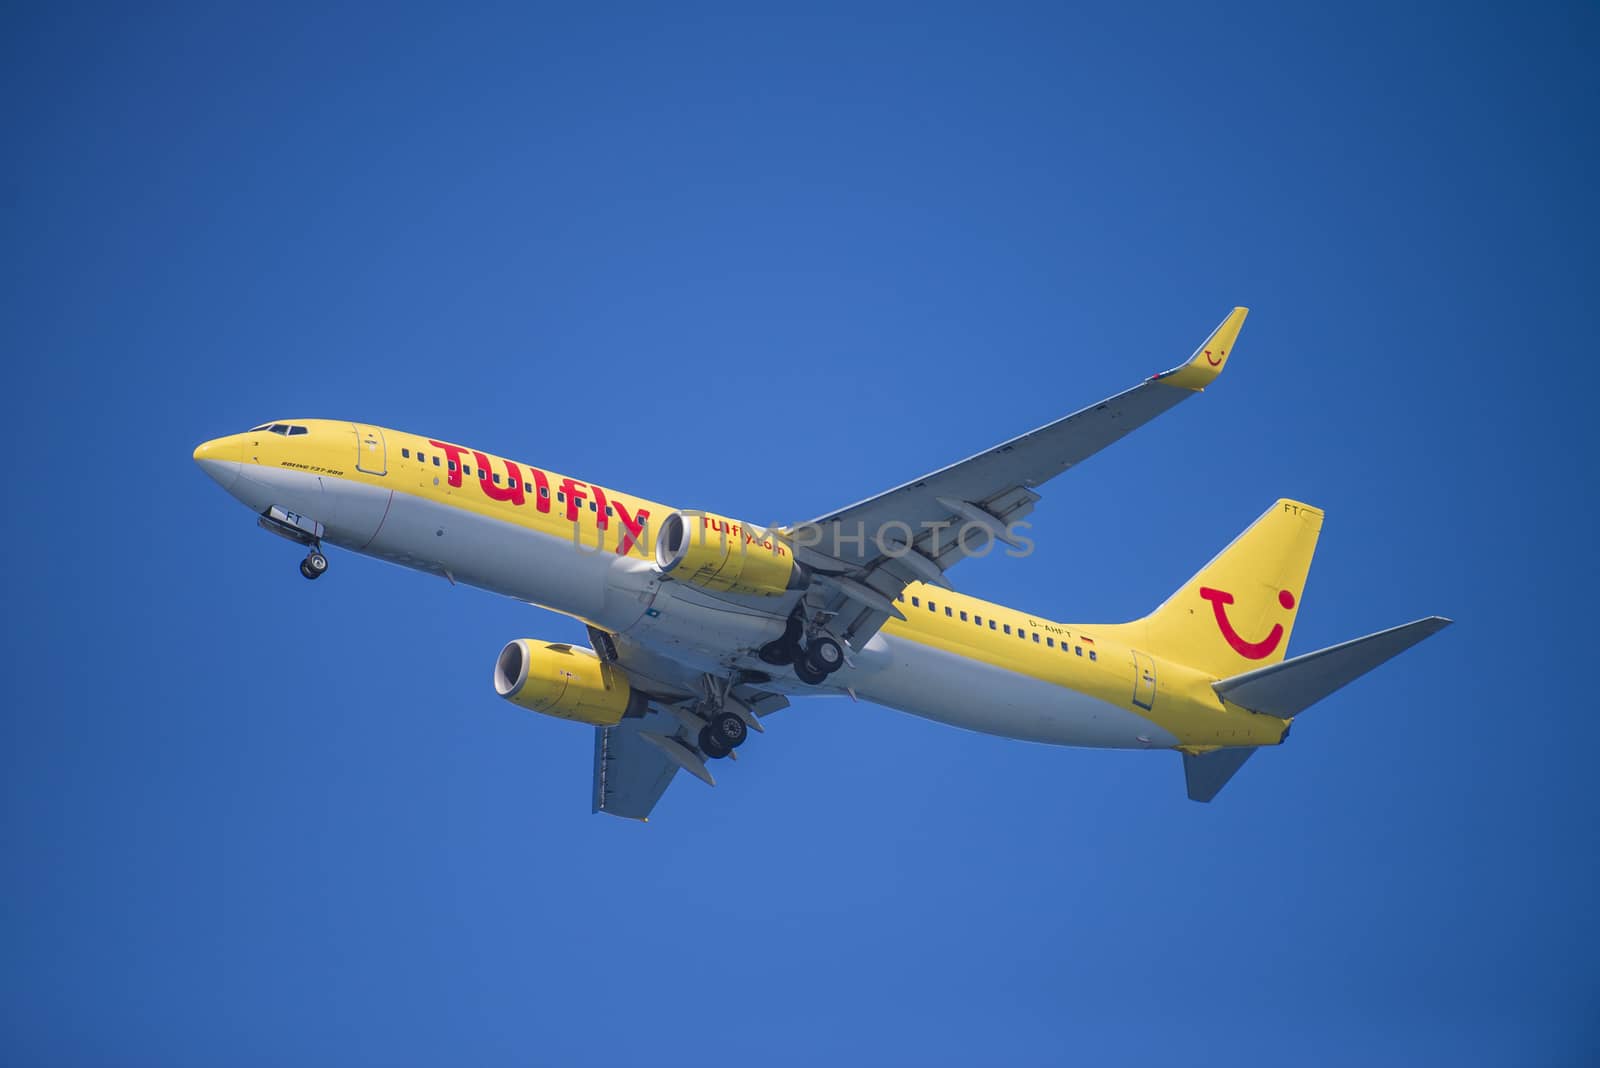 Tuifly, Germany, Boeing 737-800. The pictures of the planes are shot very close an airport just before landing. September 2013.